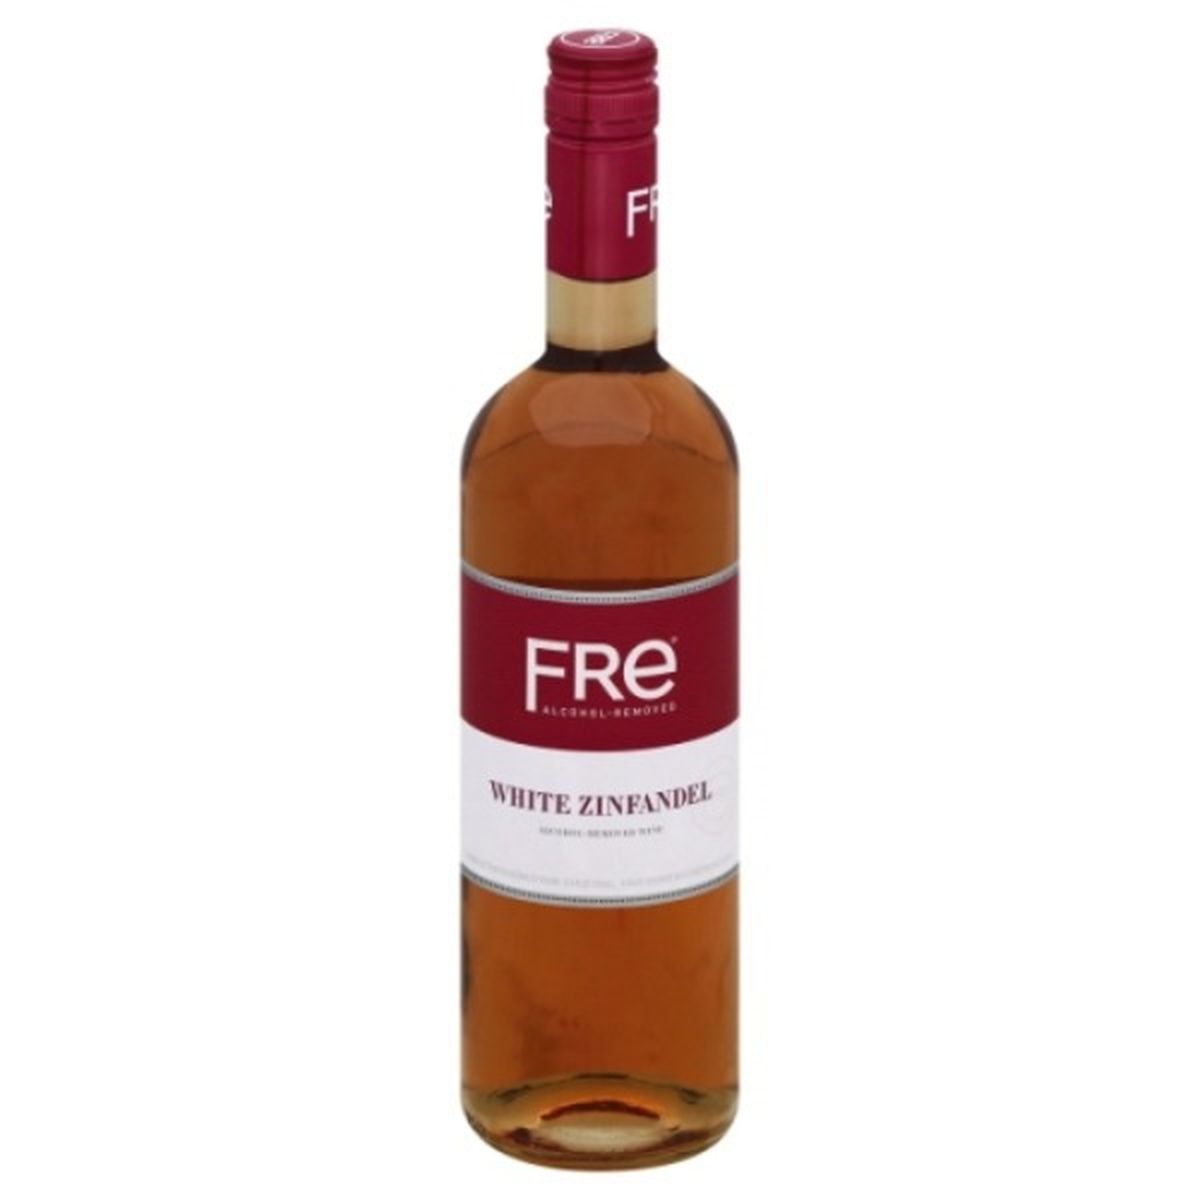 Calories in Fre, Alcohol Removed, White Zinfandel, 2003